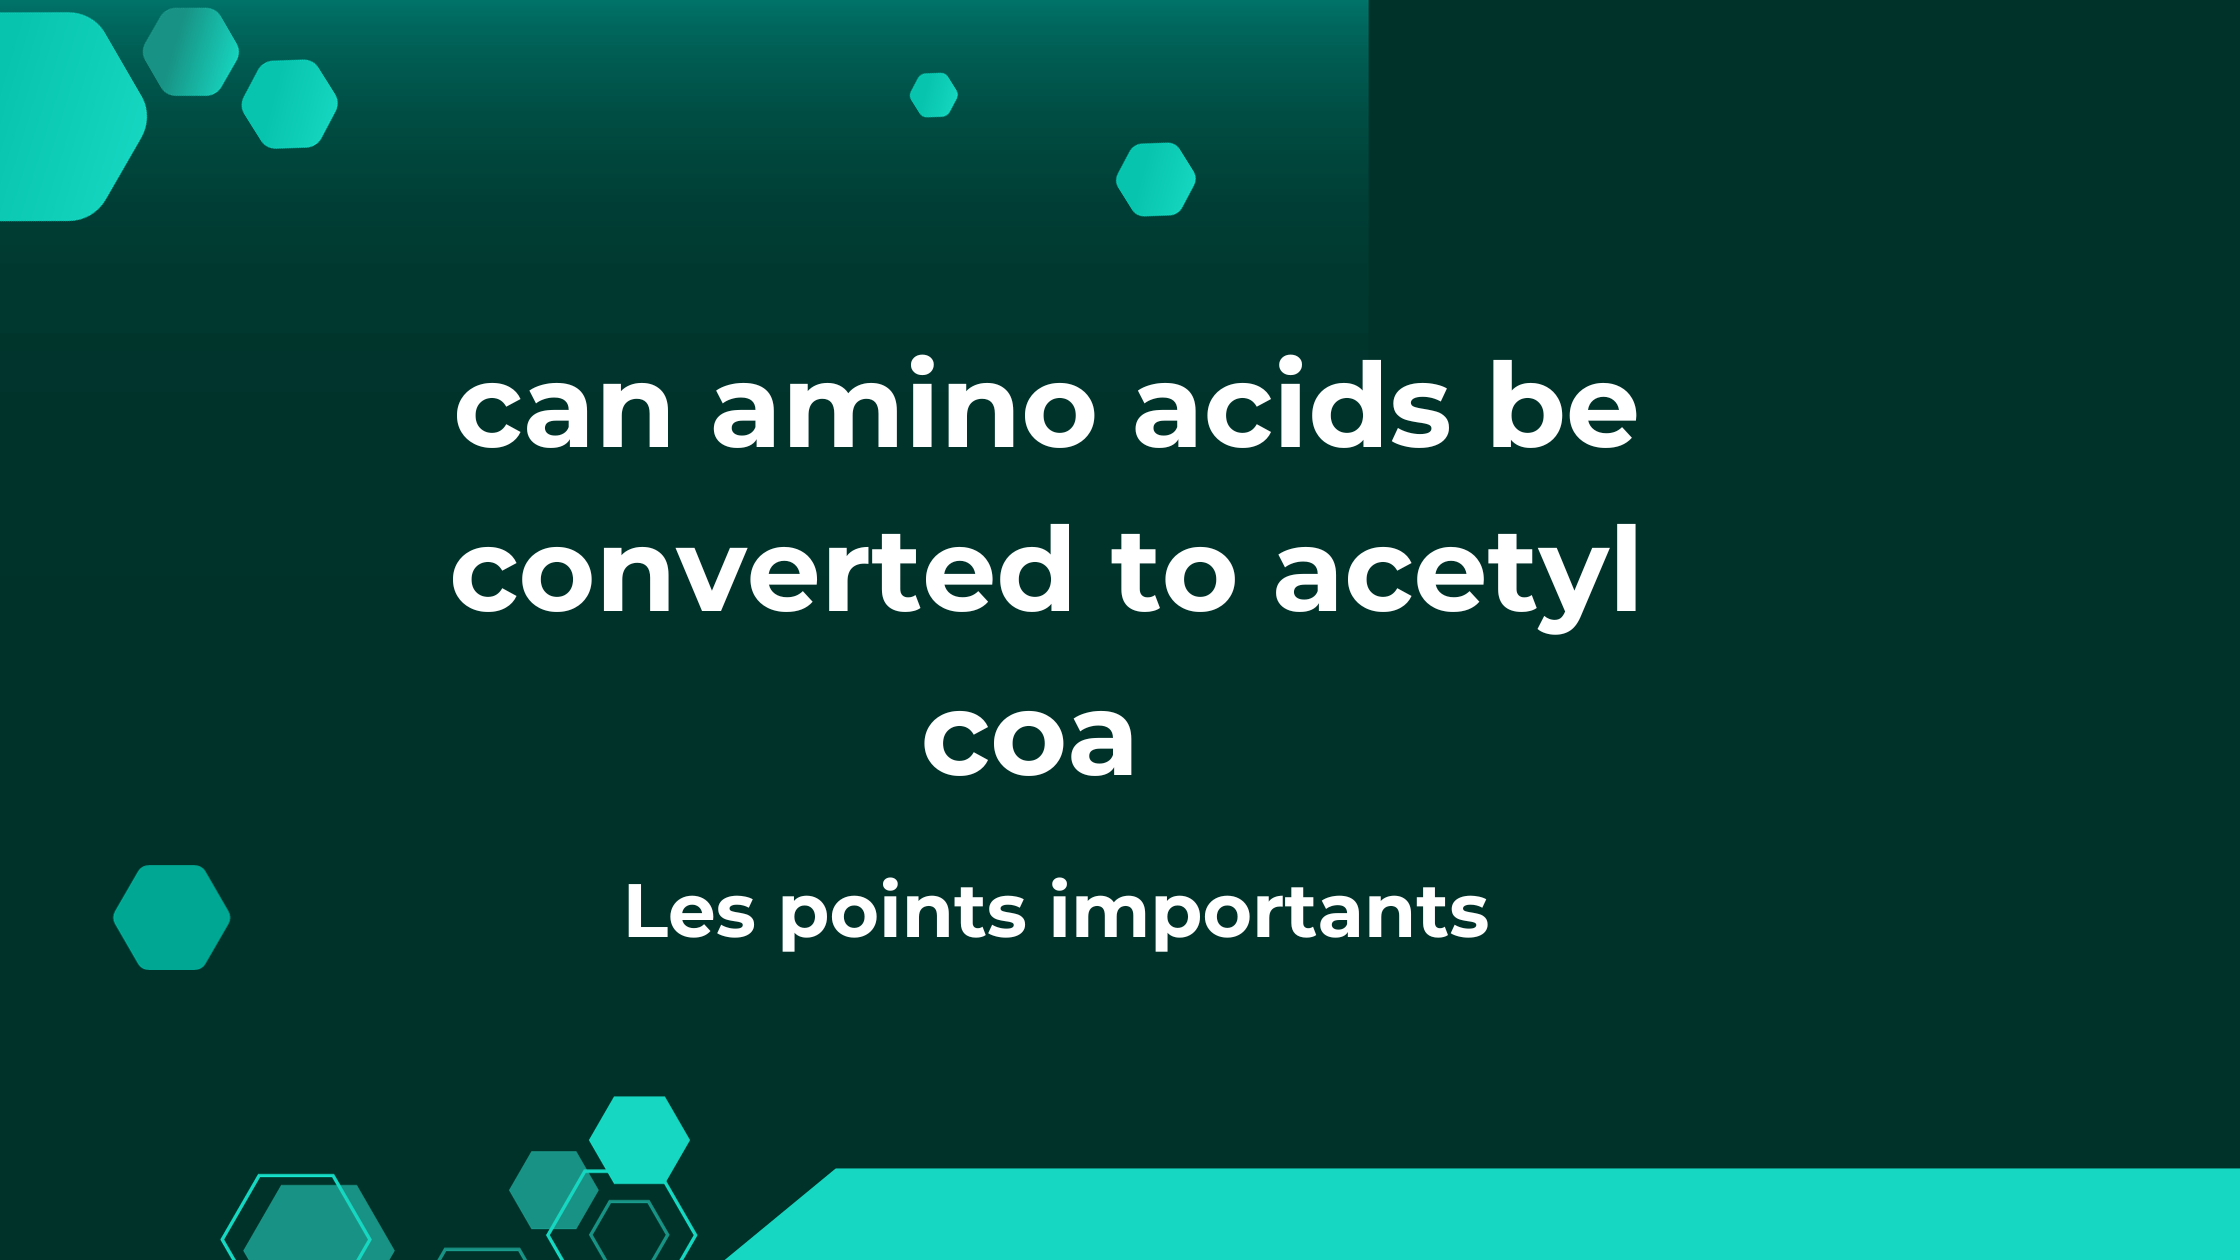 can amino acids be converted to acetyl coa | Les points importants